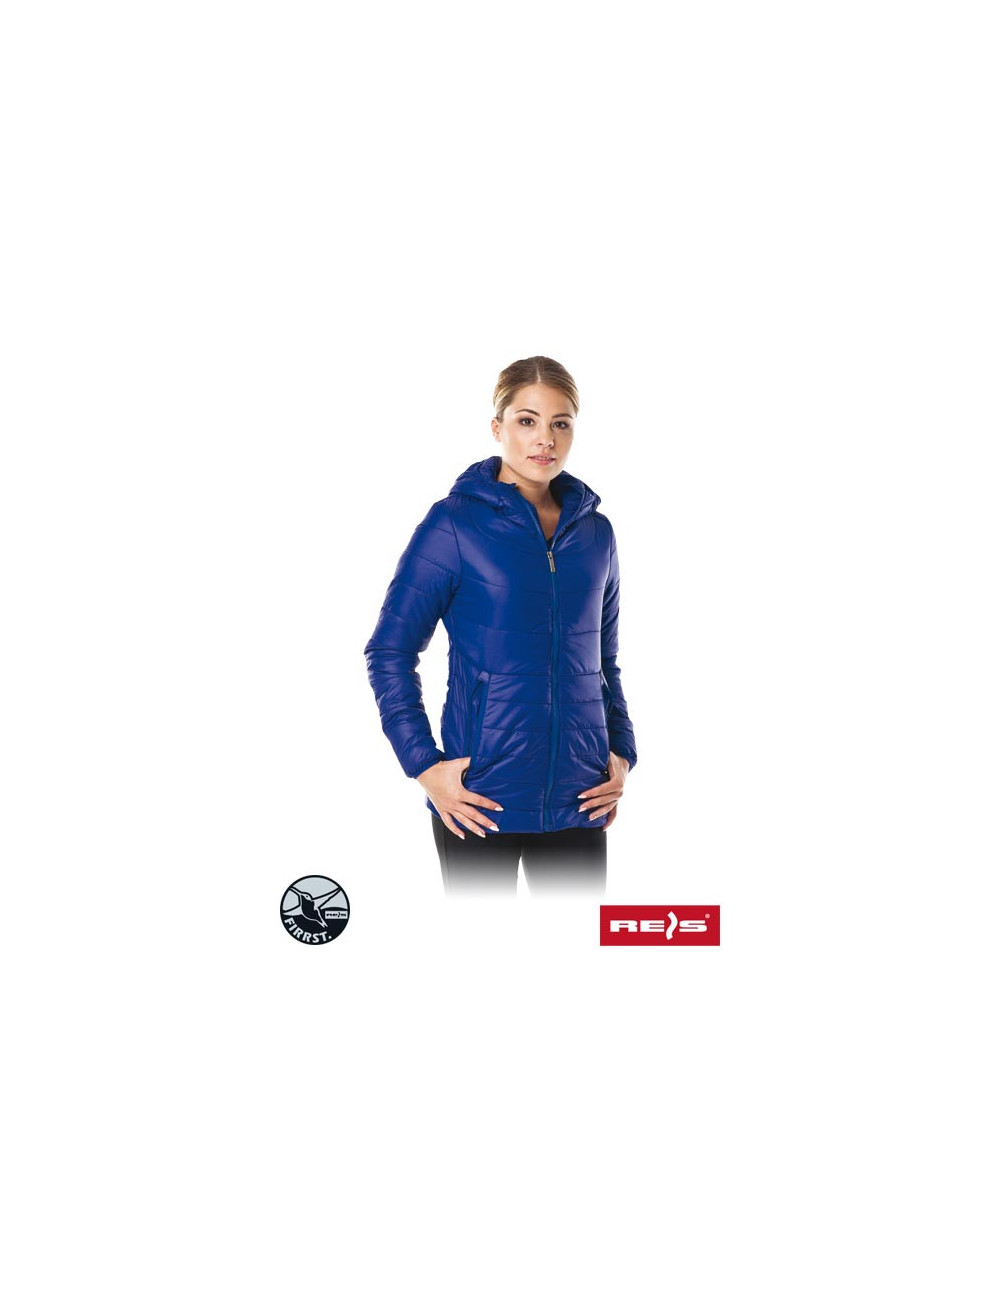 Protective jacket insulated discover g navy Reis